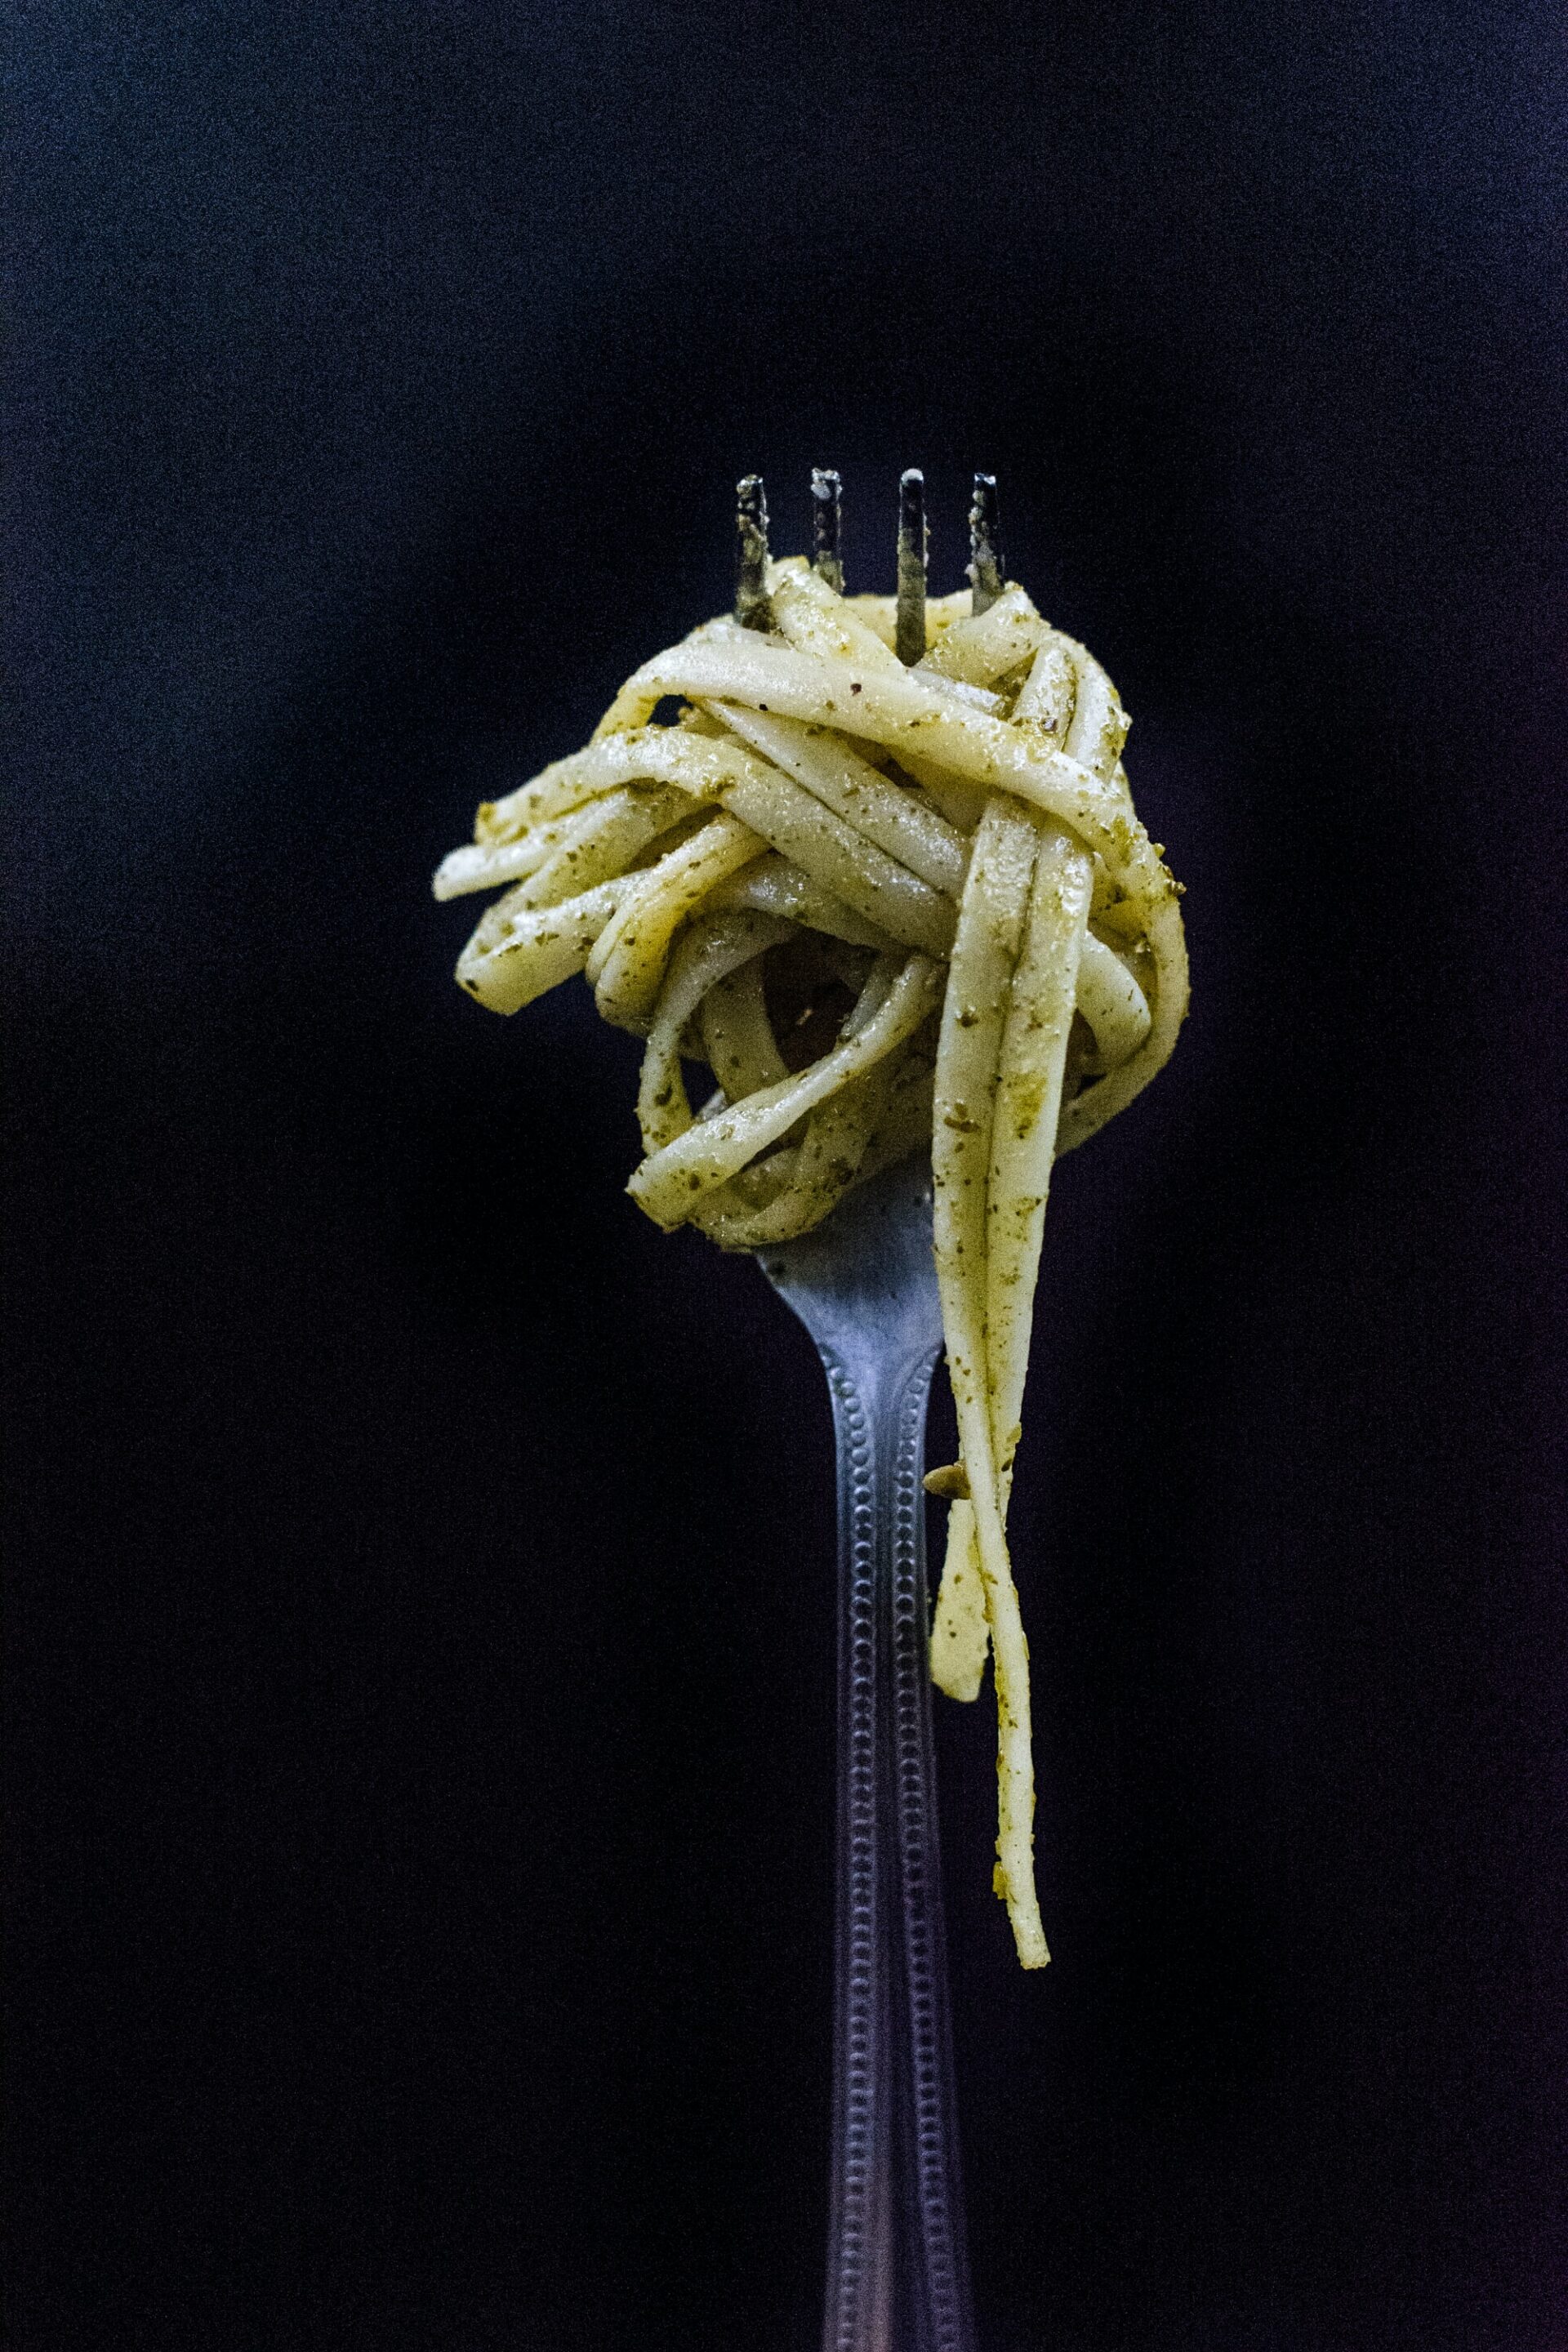 fettuccine on a fork from one of our meals at monte vista